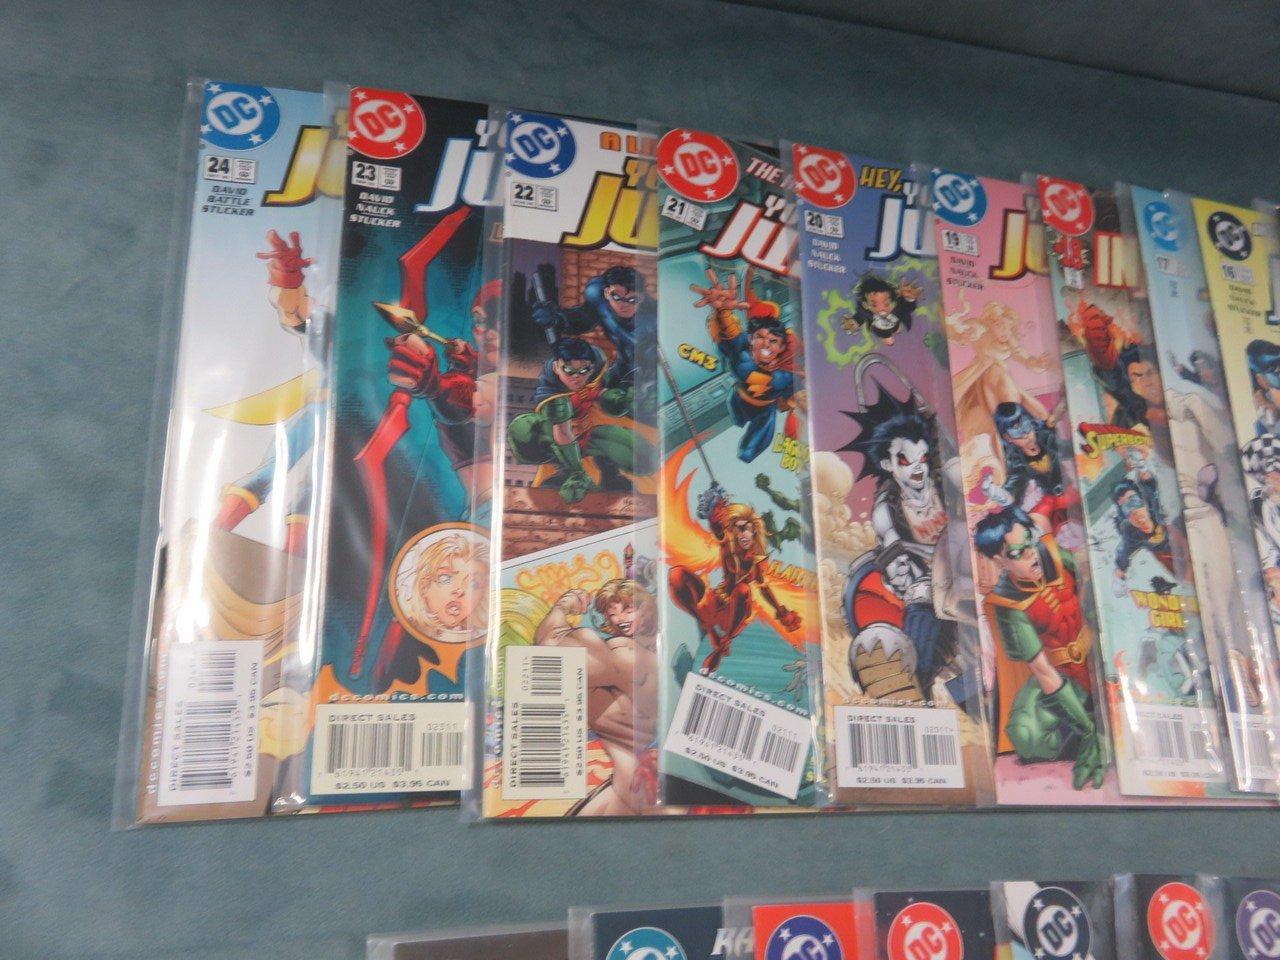 Young Justice 1998 Series 1-24